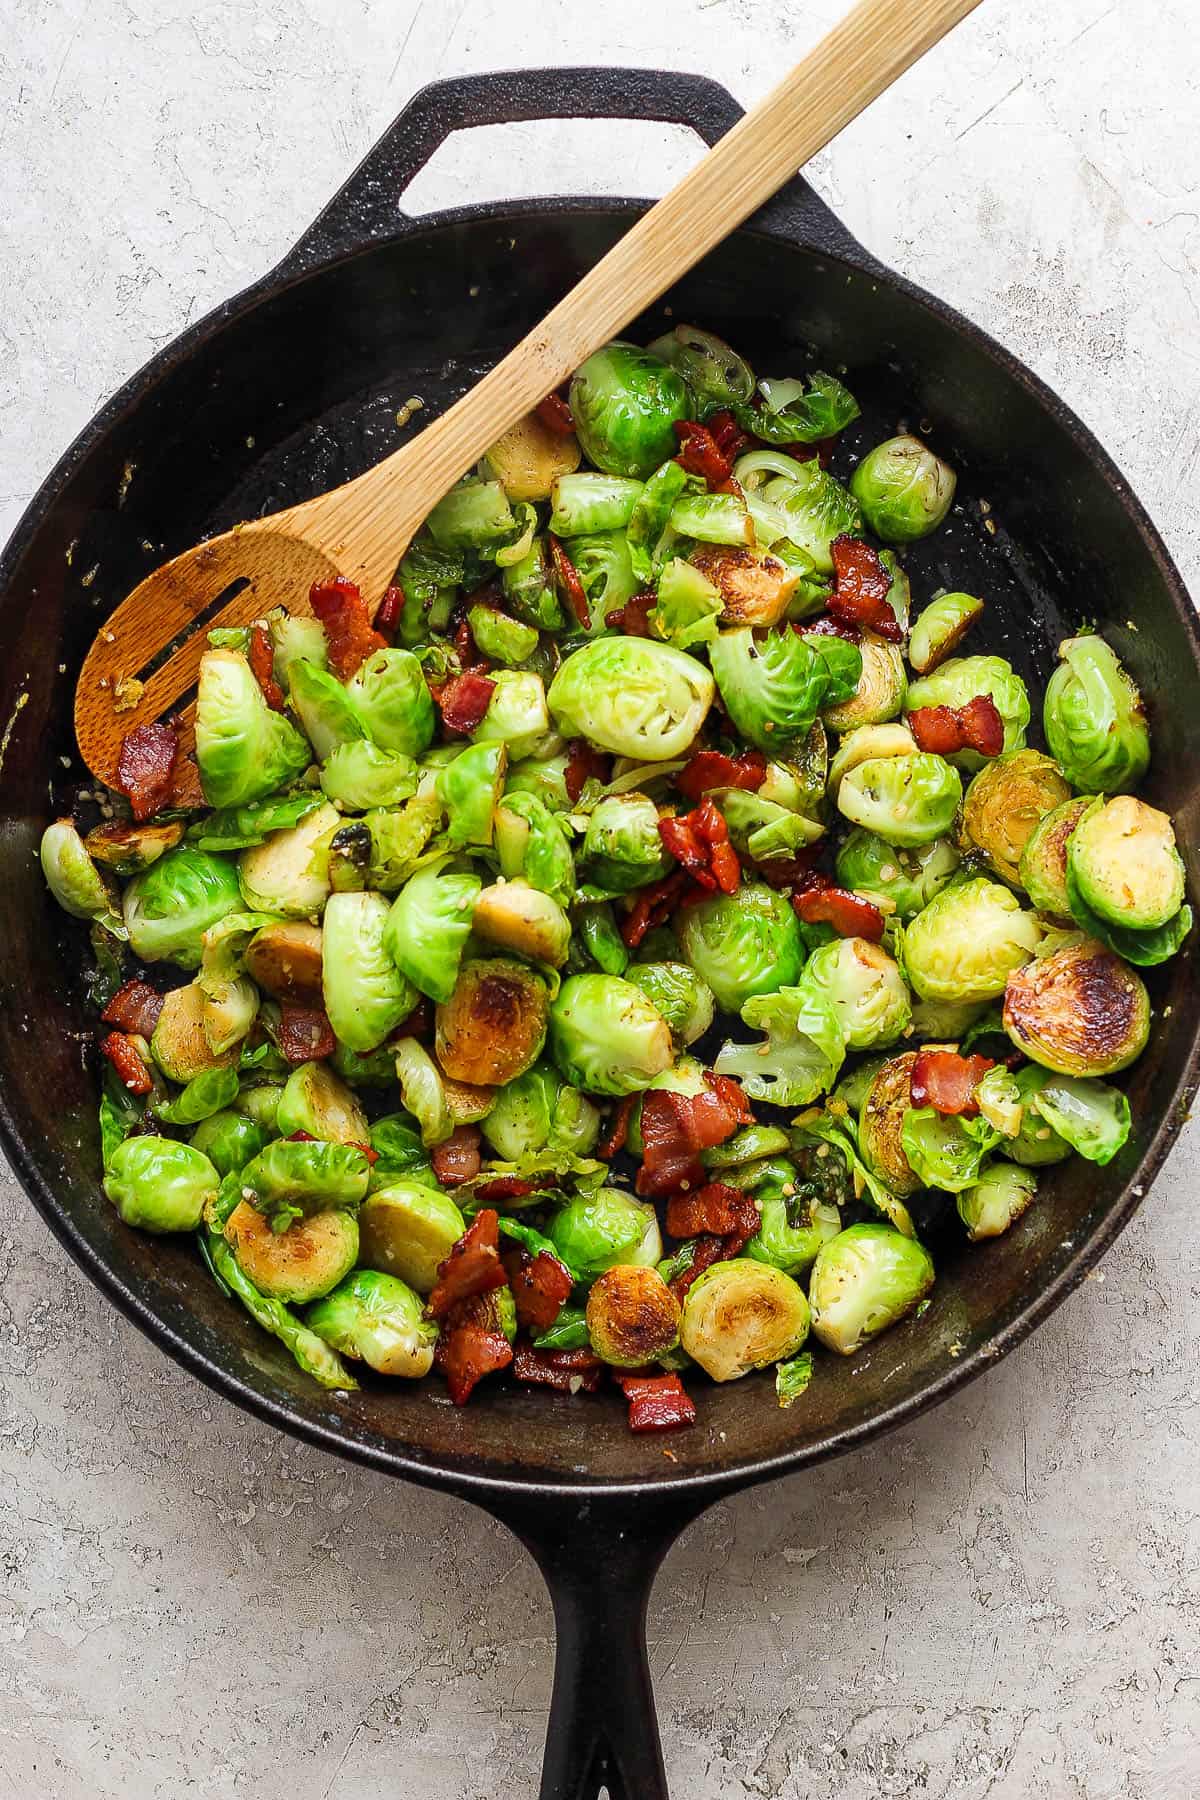 Maple bacon brussels sprouts in a skillet with a wooden spoon.